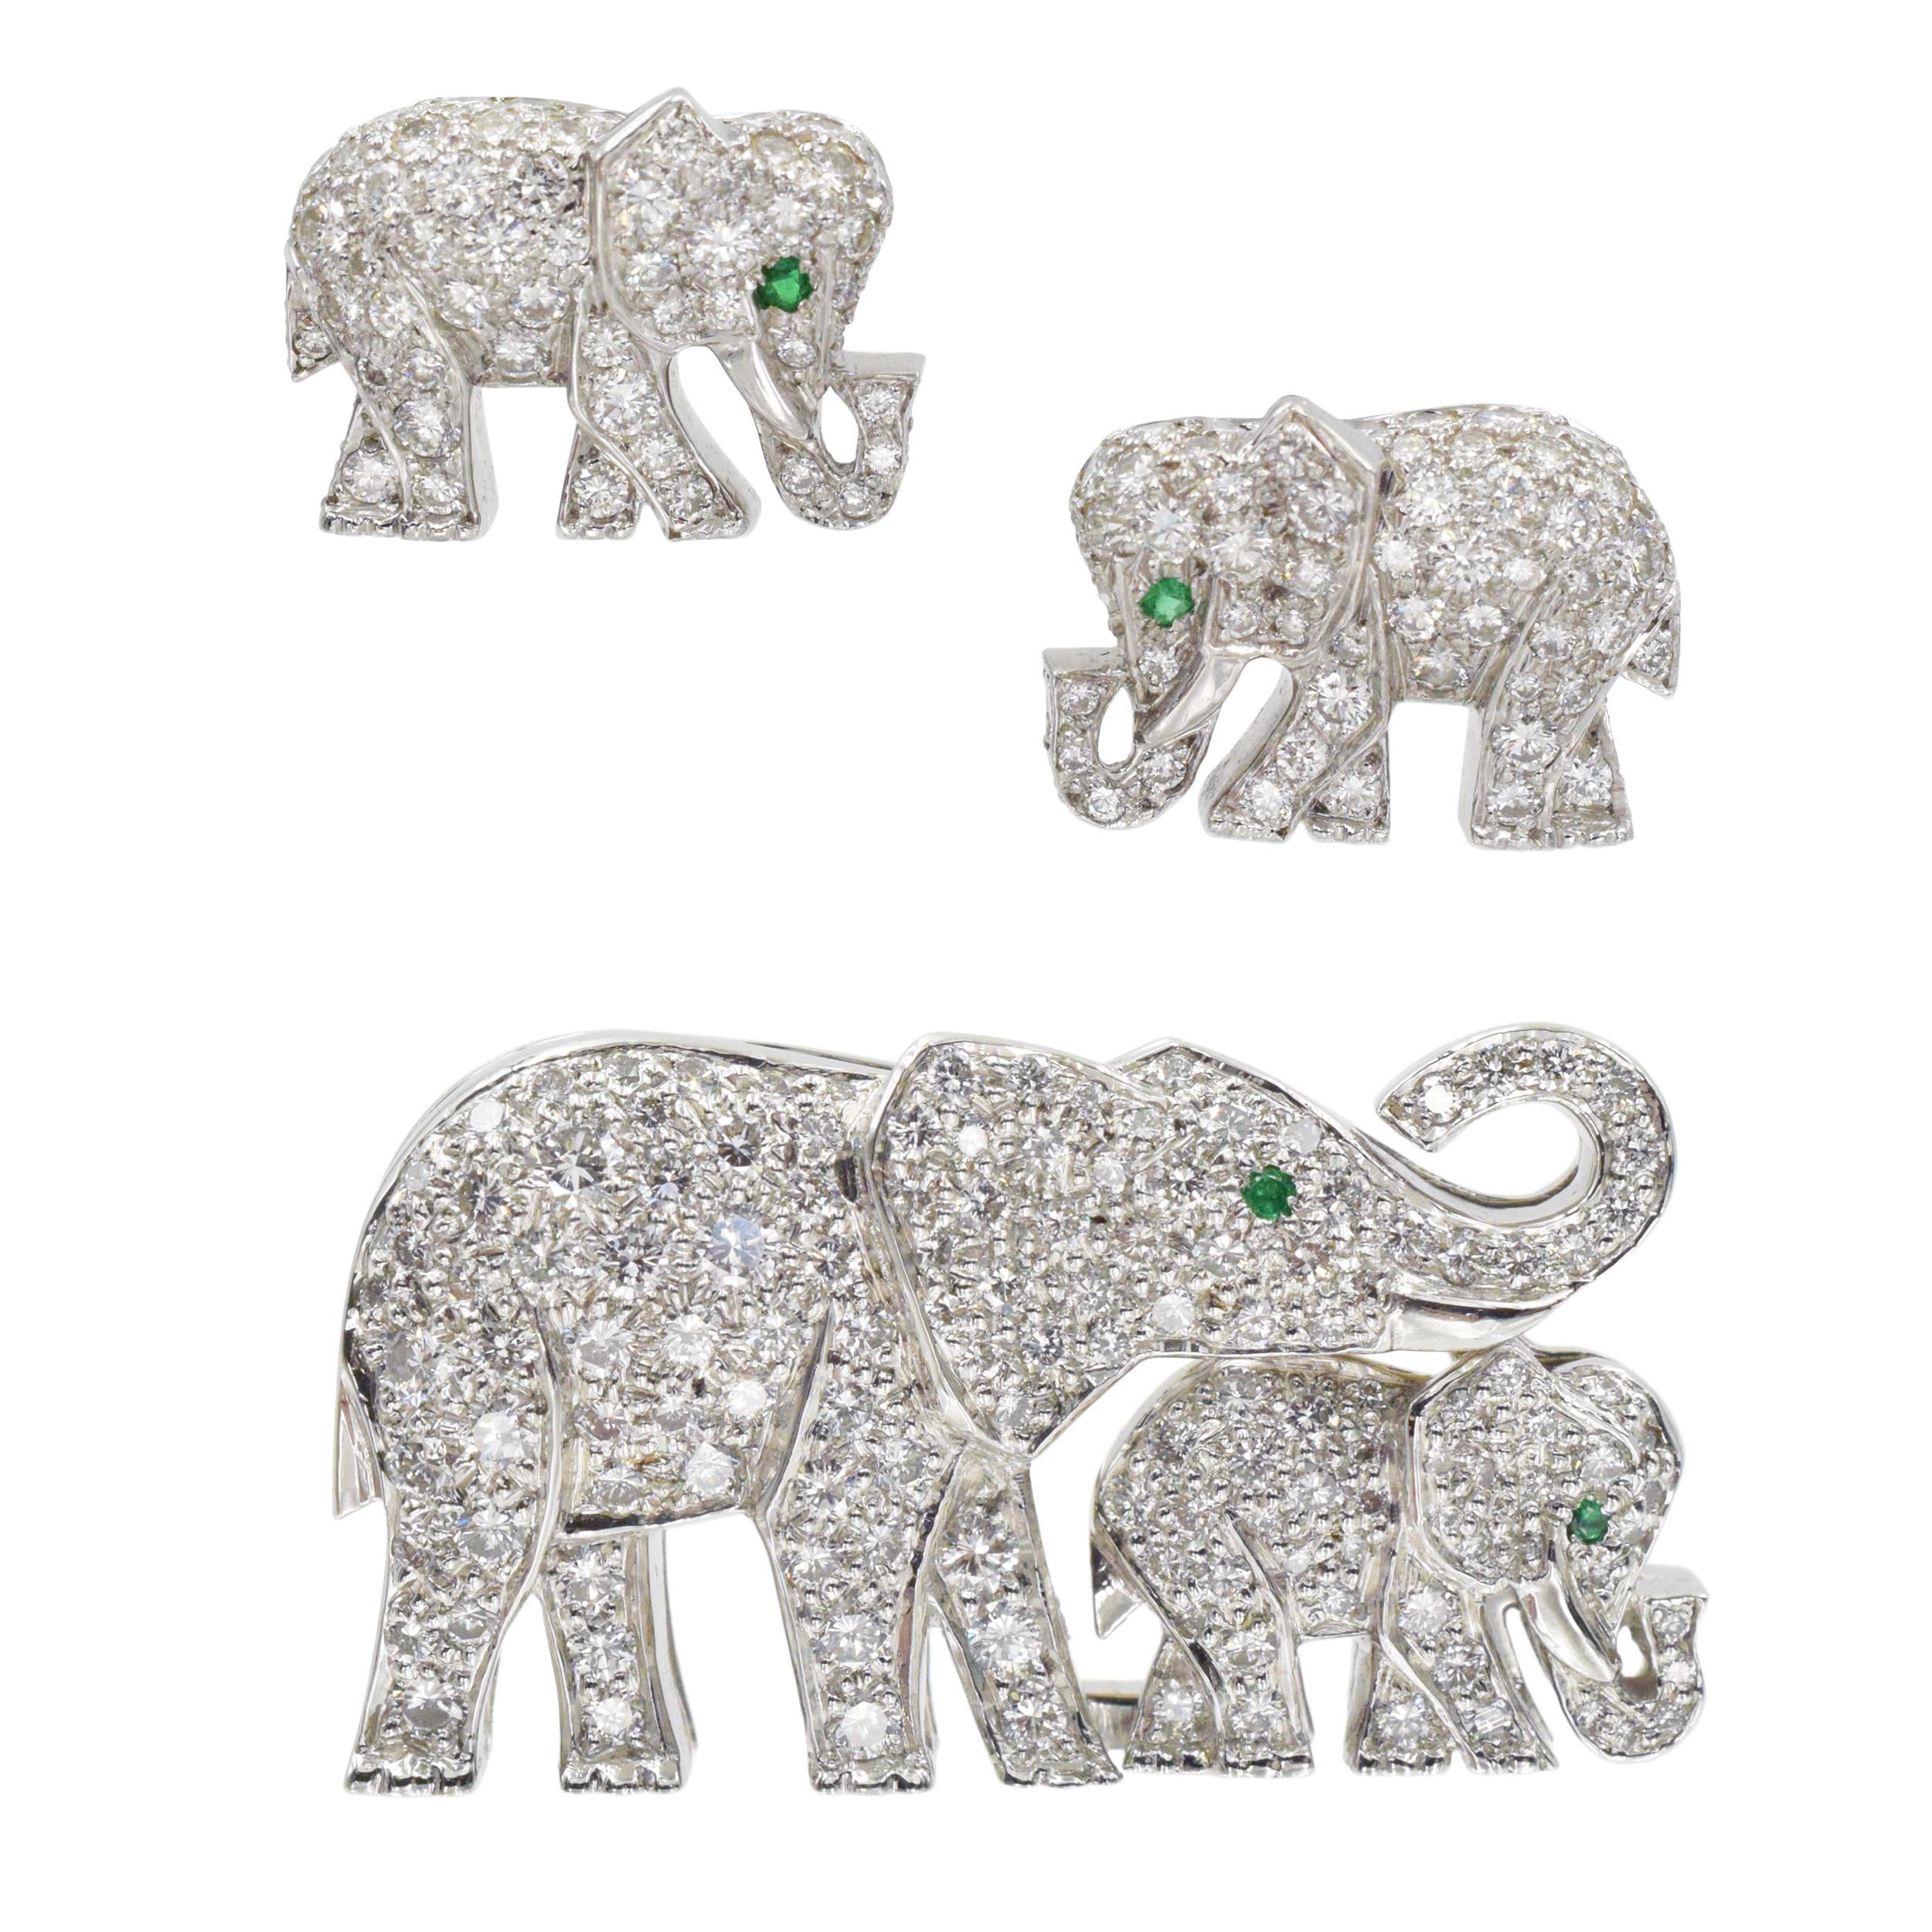 Cartier Diamond and Emerald Elephant Brooch and Earrings Set In Platinum.